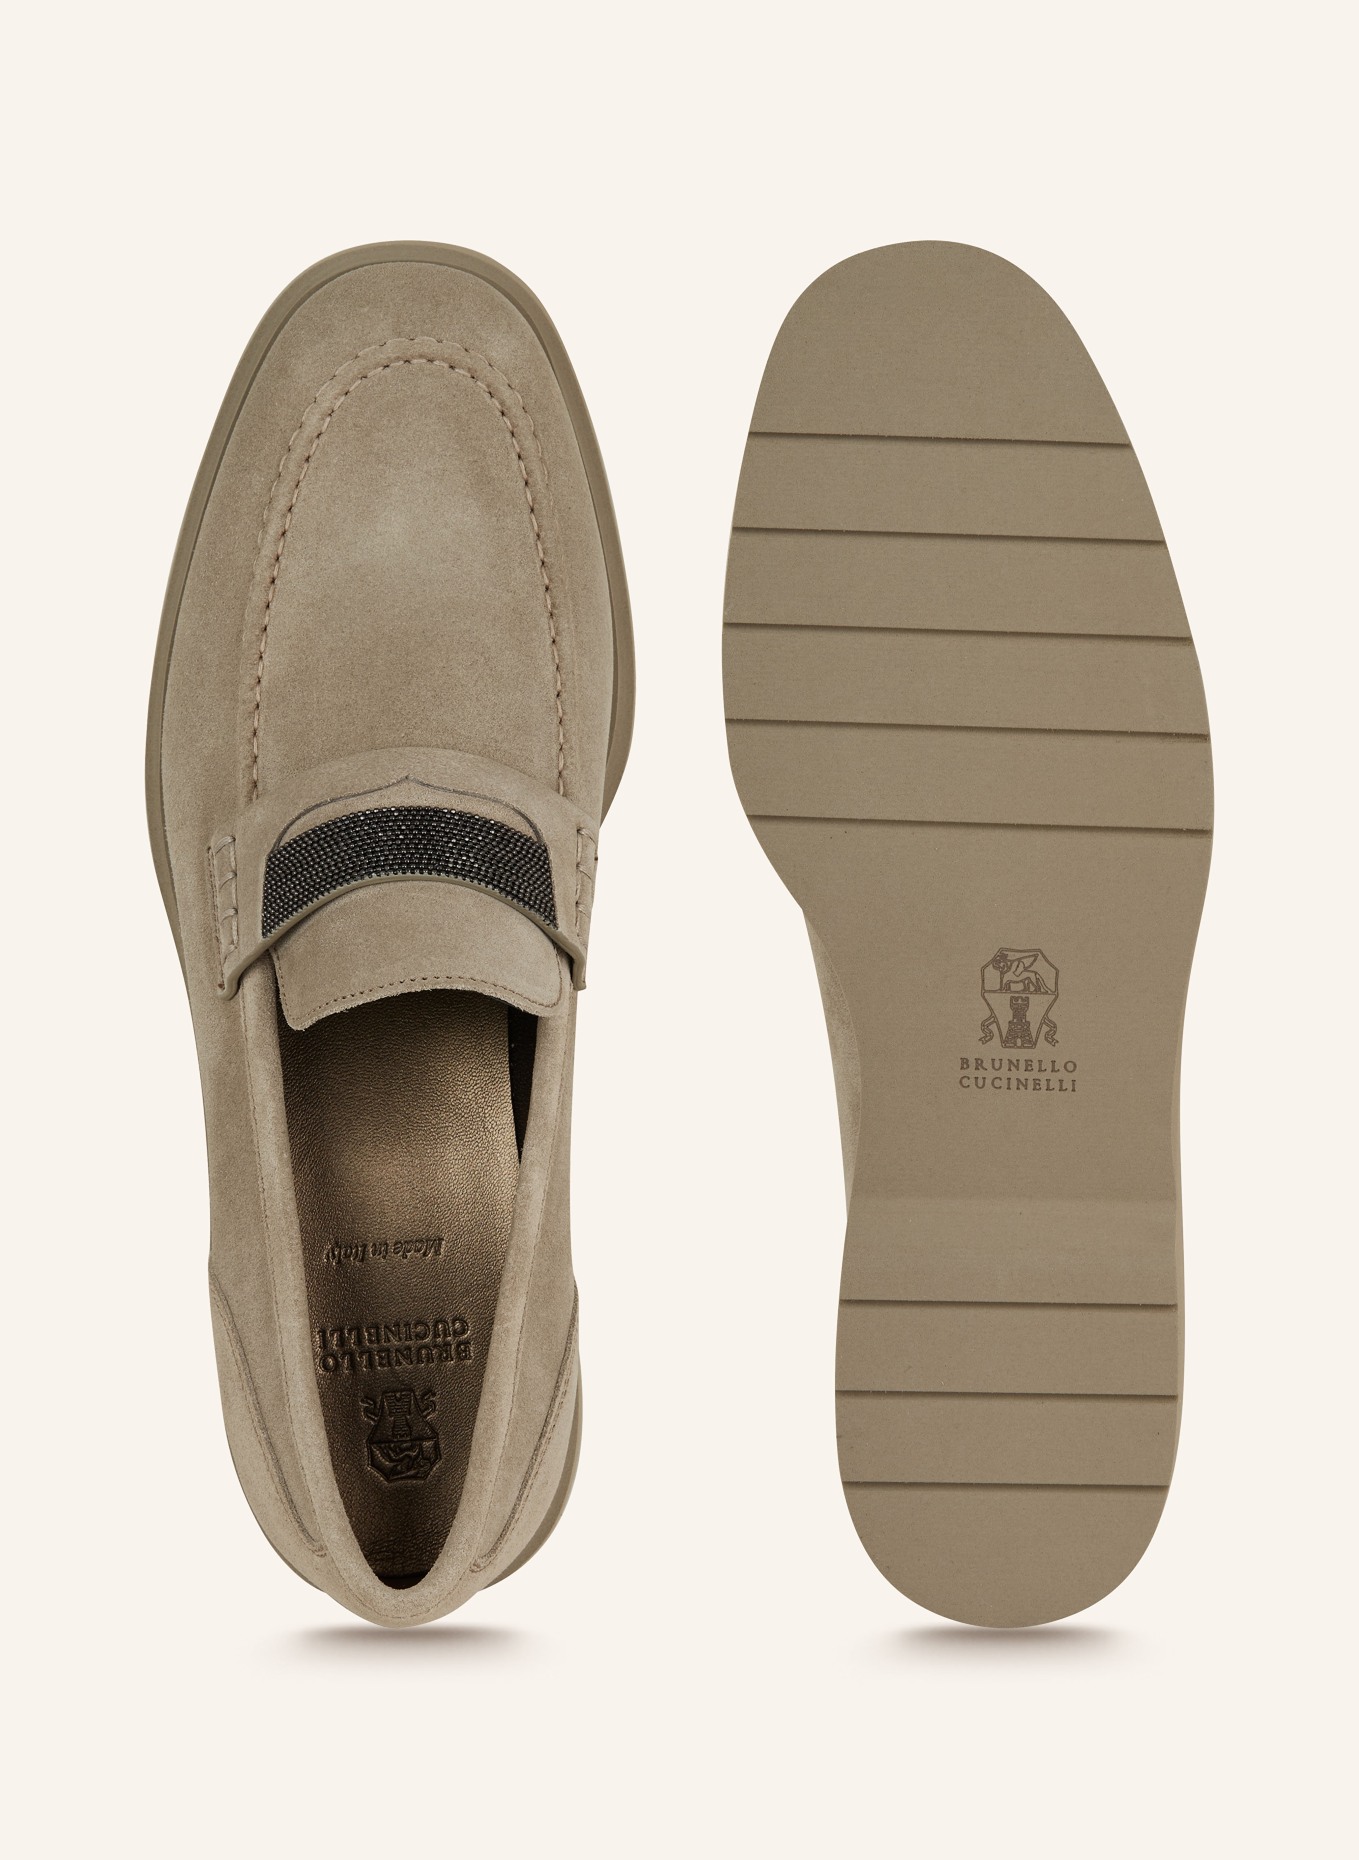 BRUNELLO CUCINELLI Penny loafers, Color: TAUPE (Image 5)